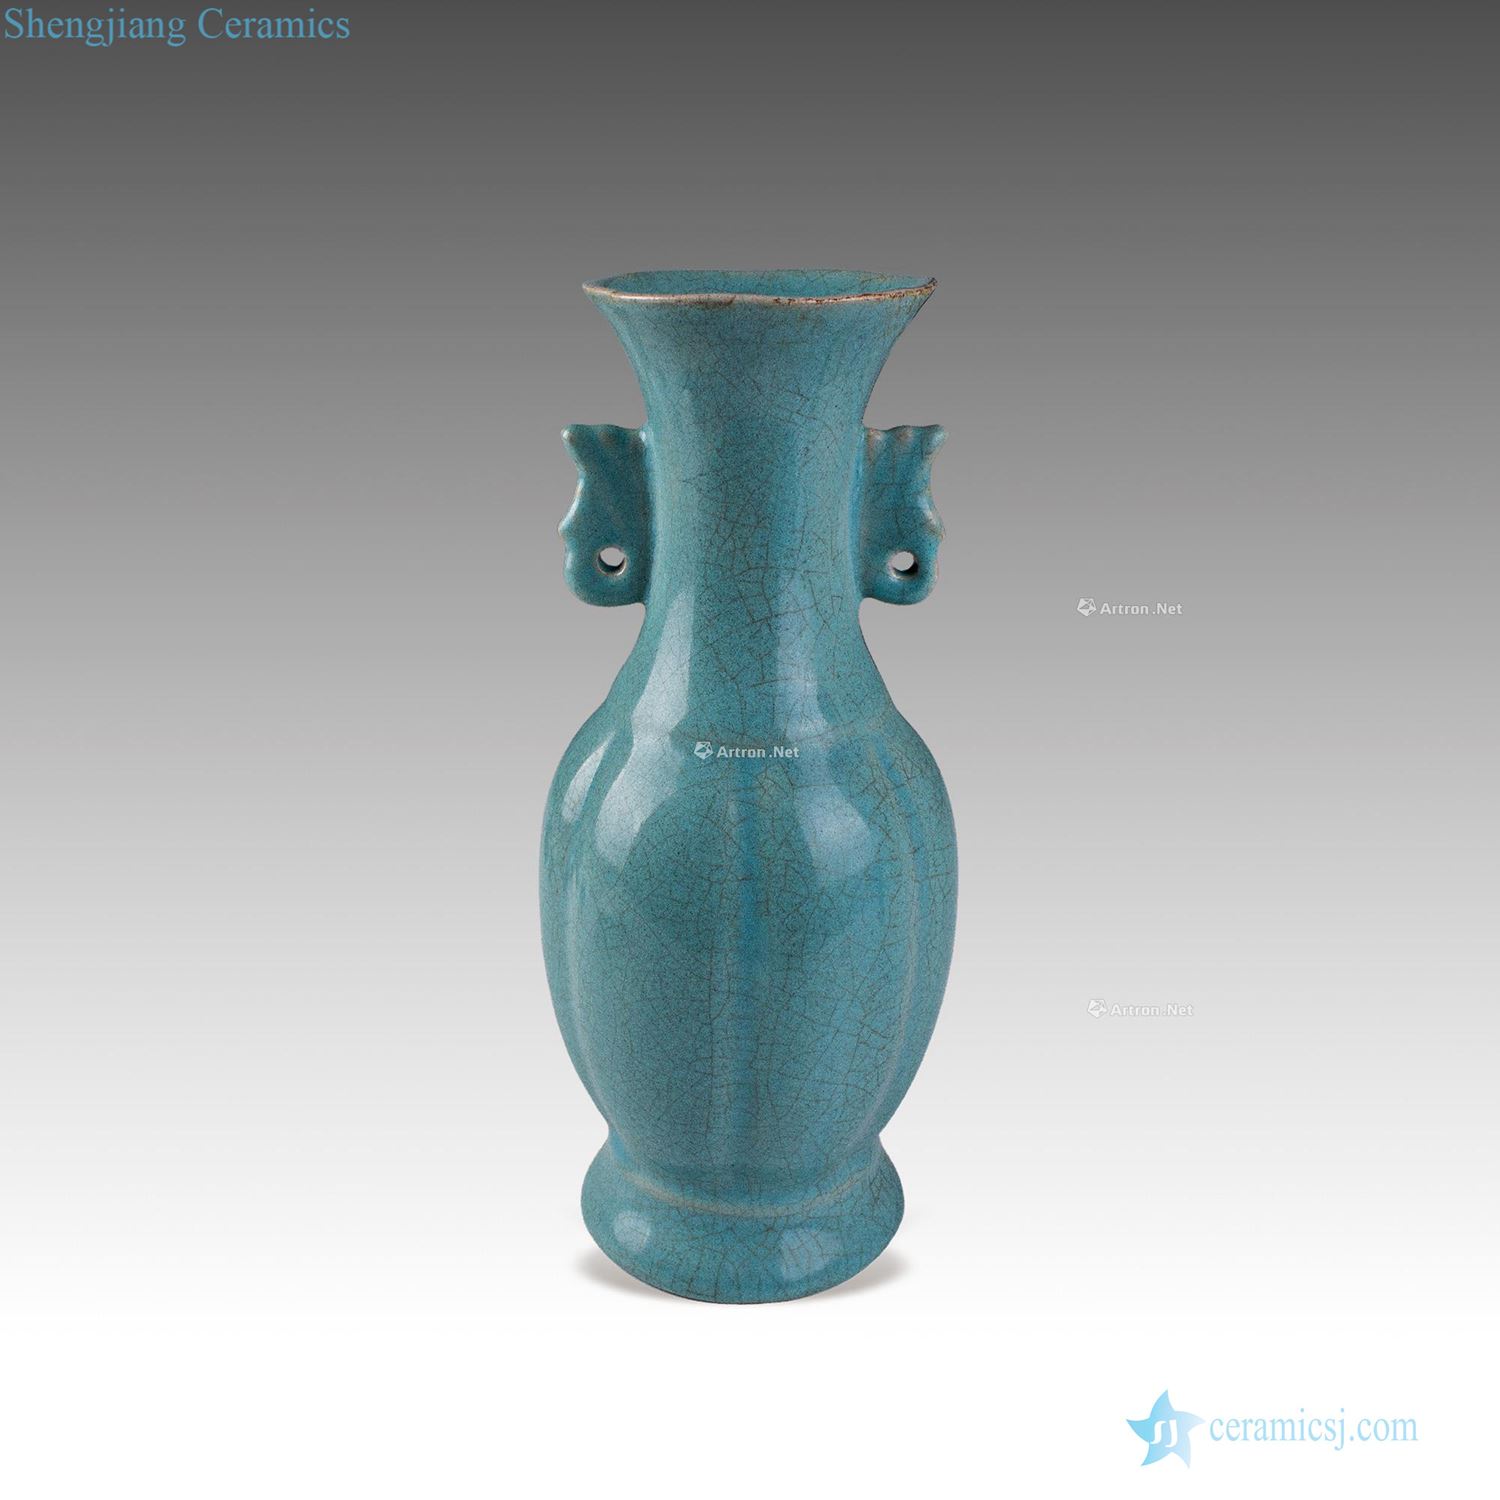 The song dynasty Your kiln melon leng fung ears mouth bottle